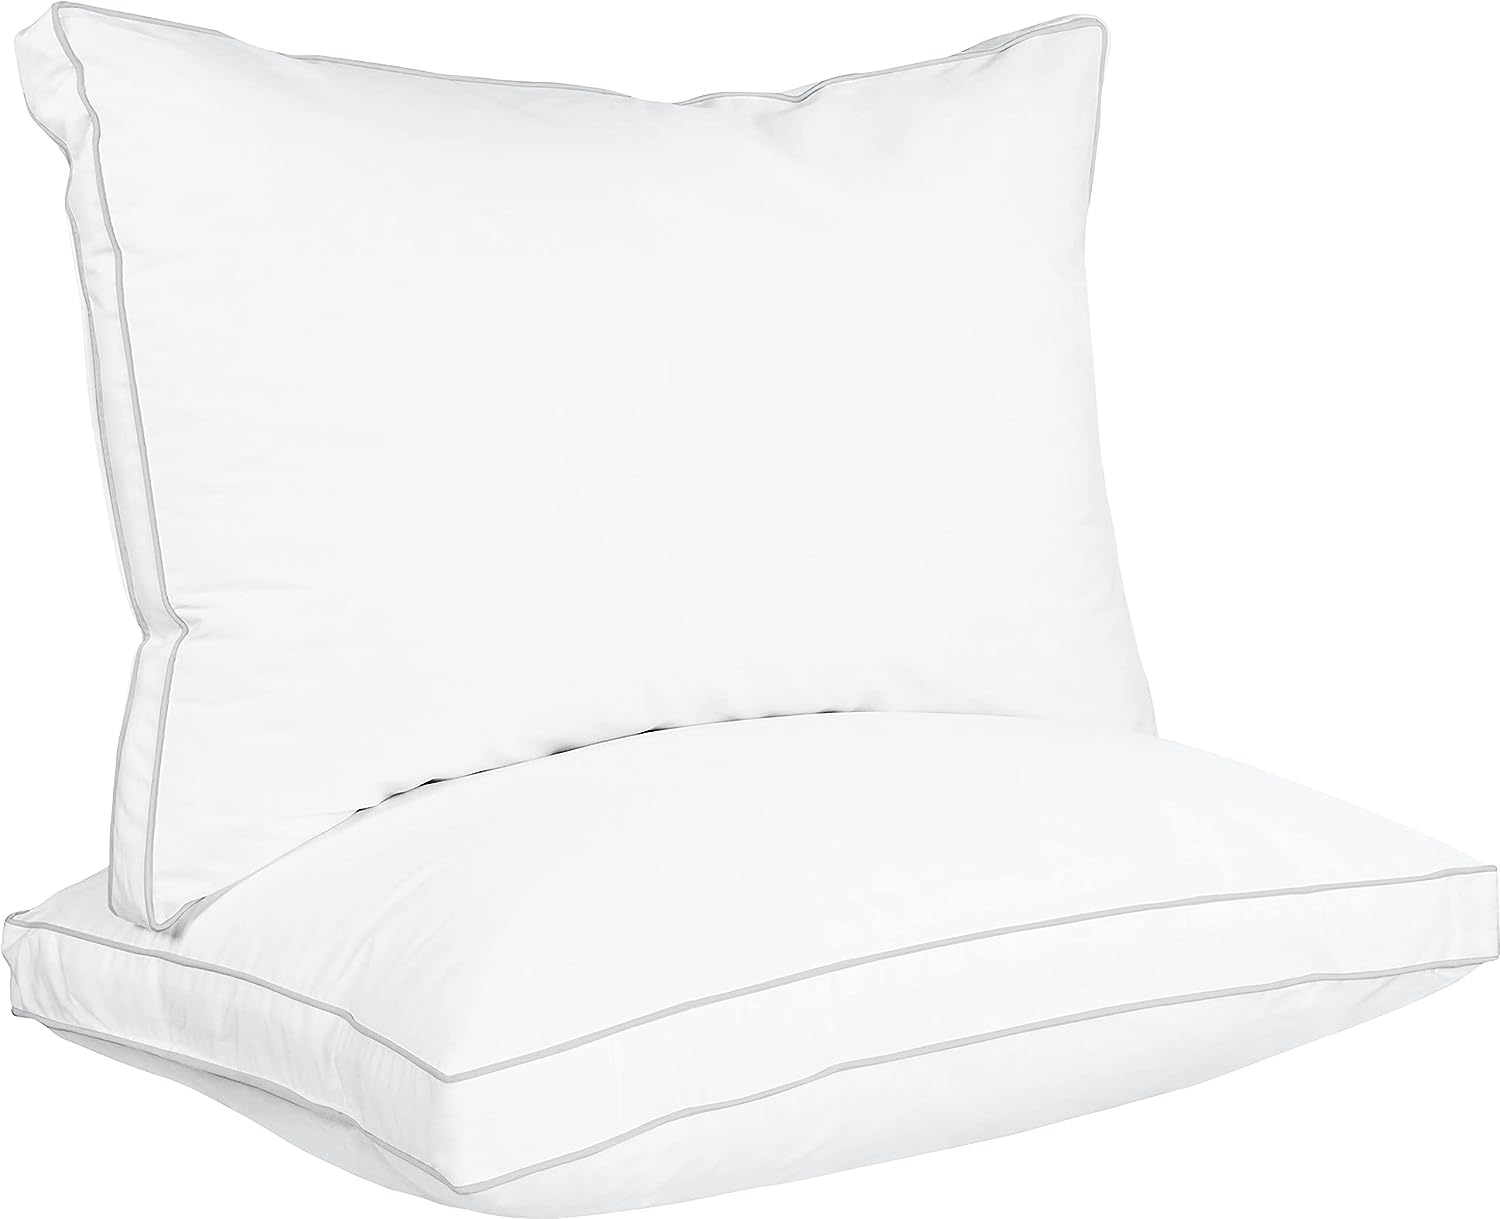  Utopia Bedding Throw Pillows Insert (Pack of 2, White) - 12 x  20 Inches Bed and Couch Pillows - Indoor Decorative Pillows : Home & Kitchen